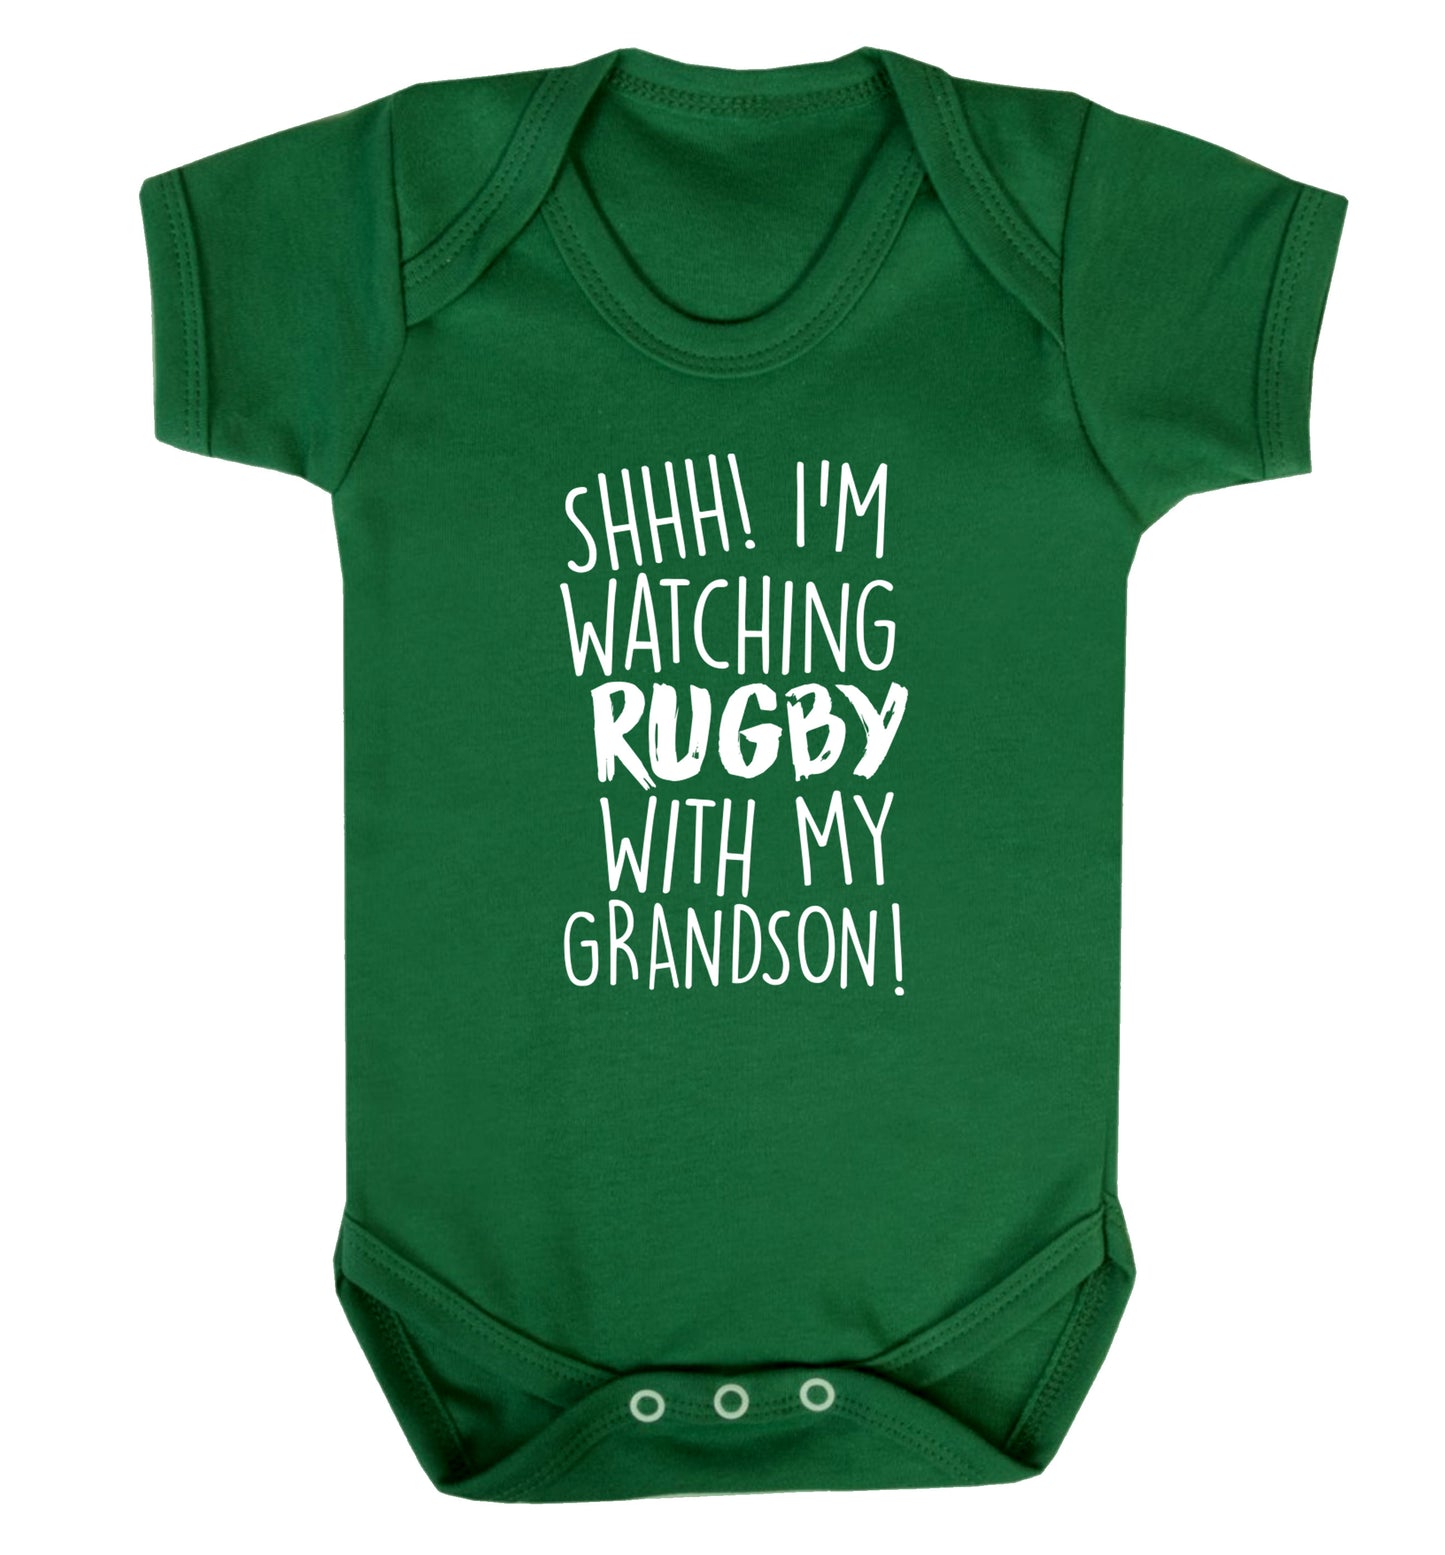 Shh I'm watching rugby with my grandson Baby Vest green 18-24 months